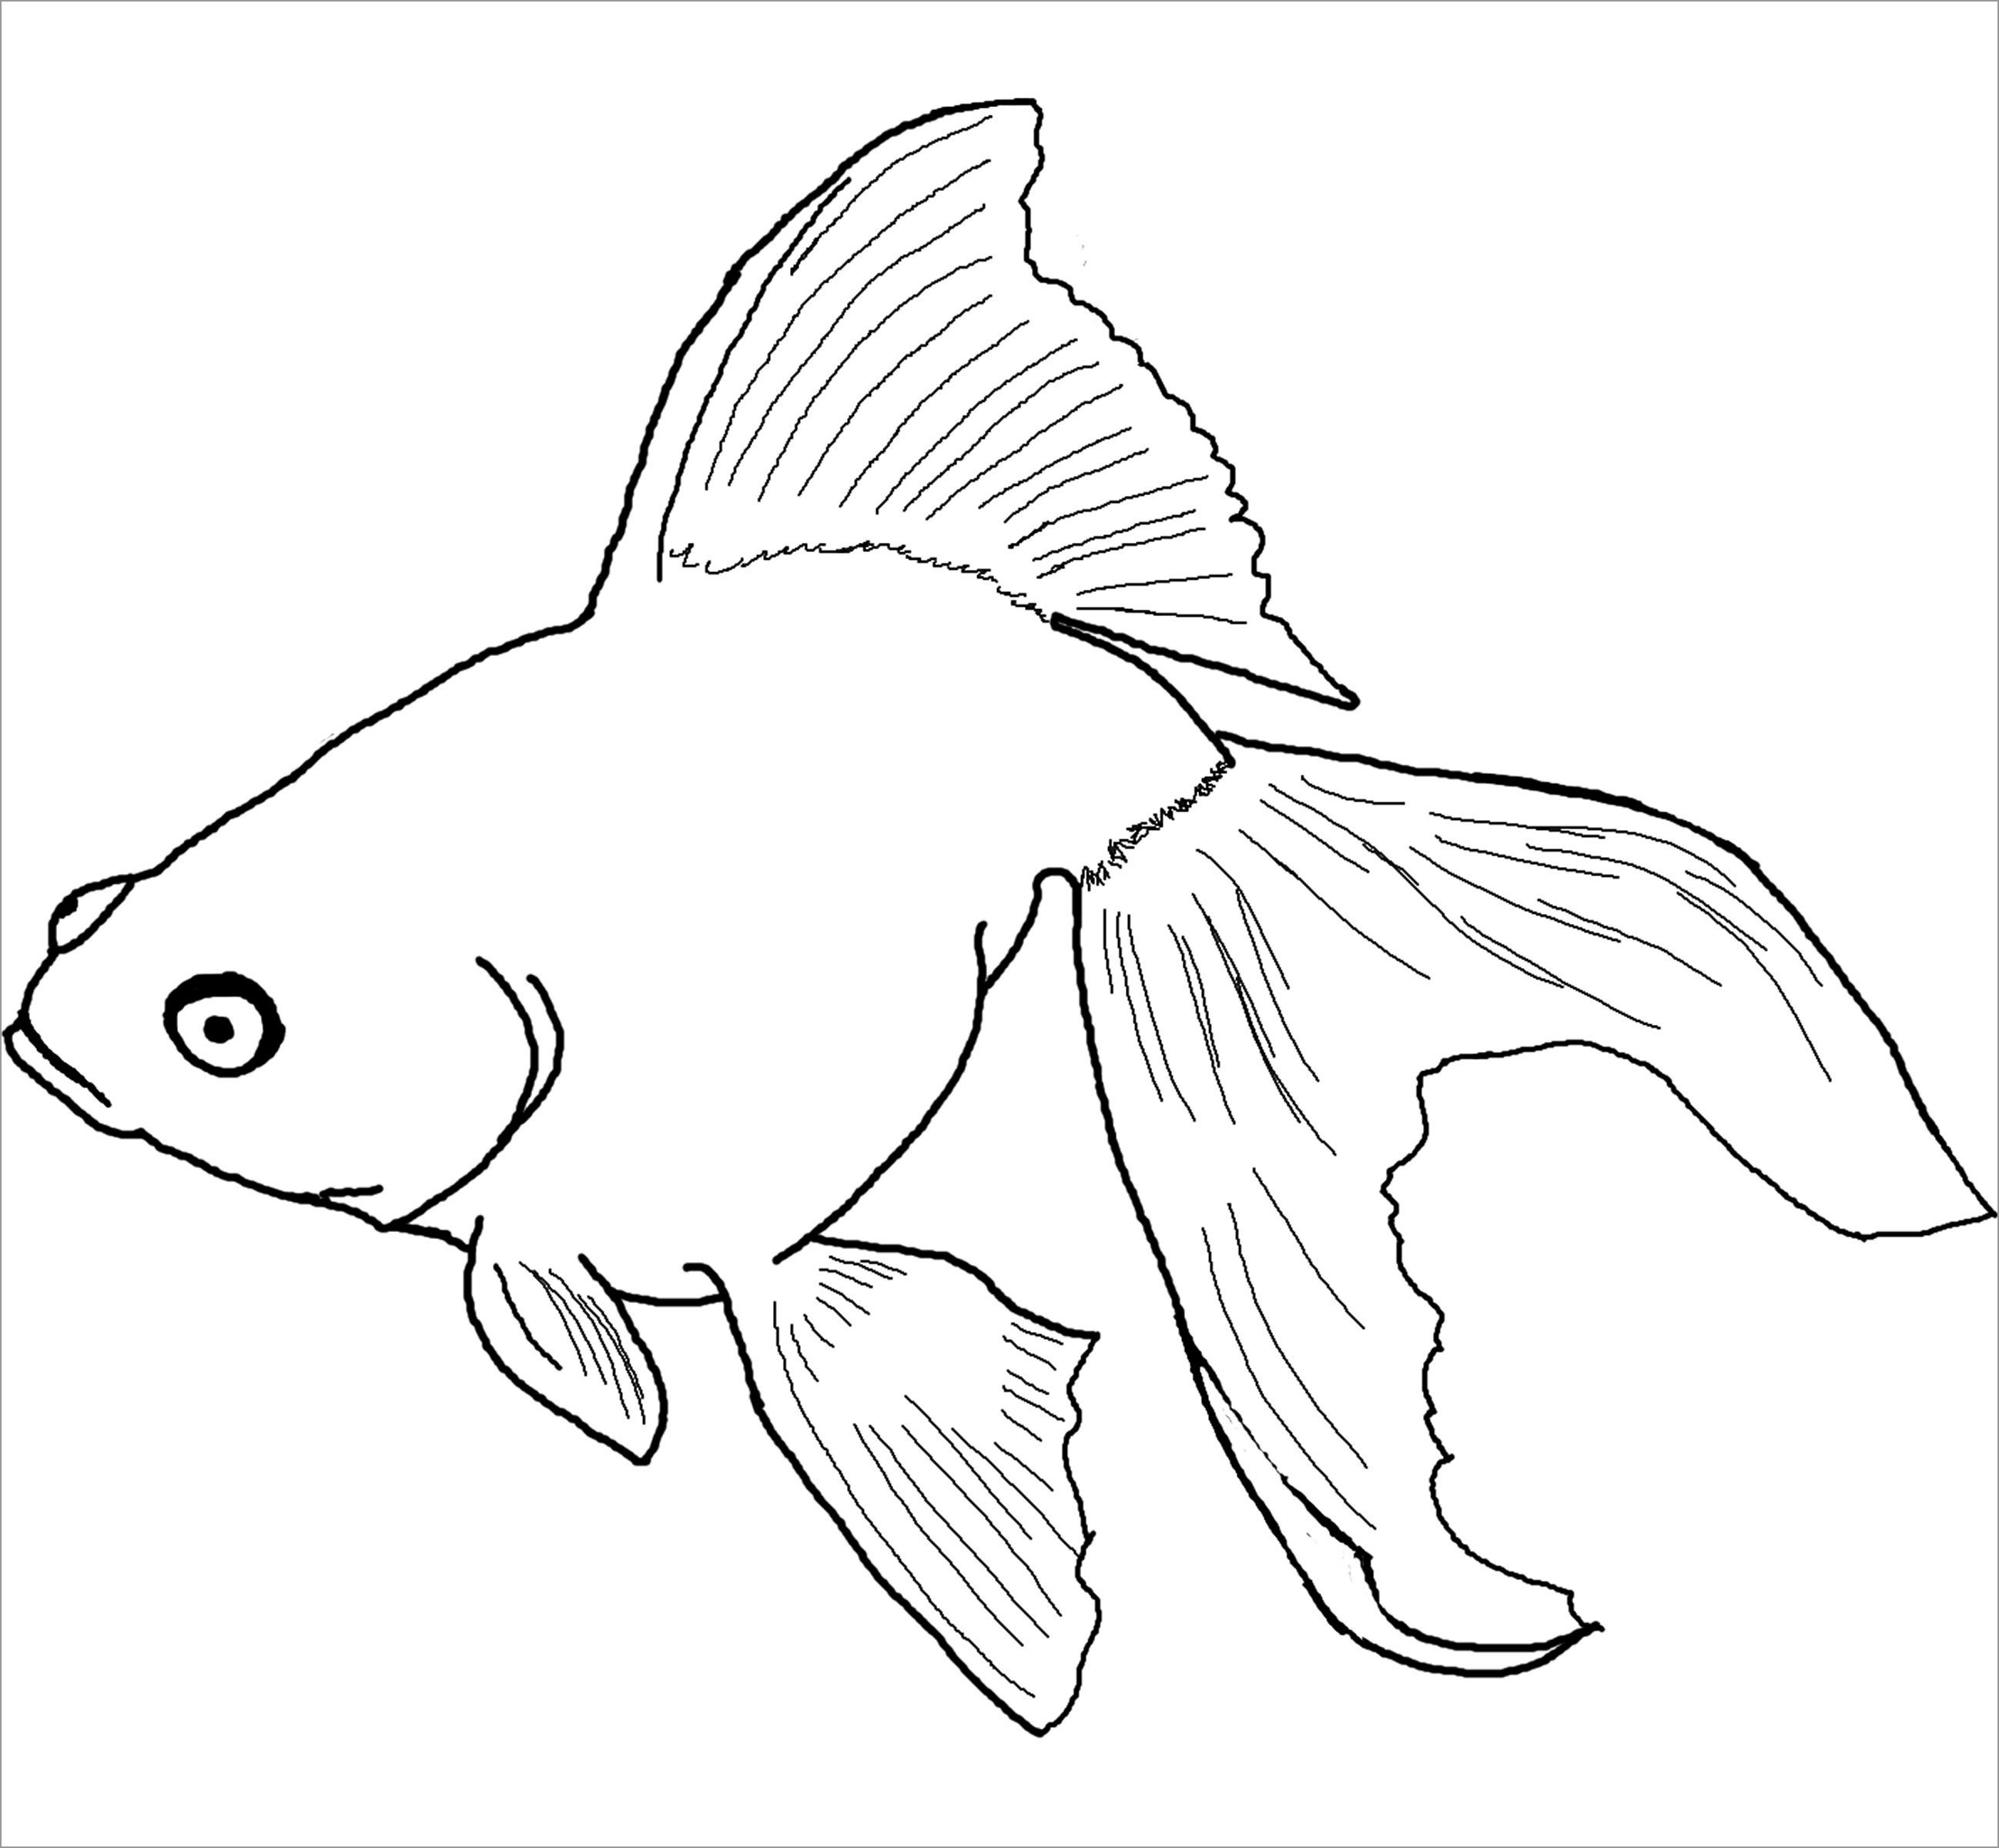 Tremendous Betta Fish Coloring Page